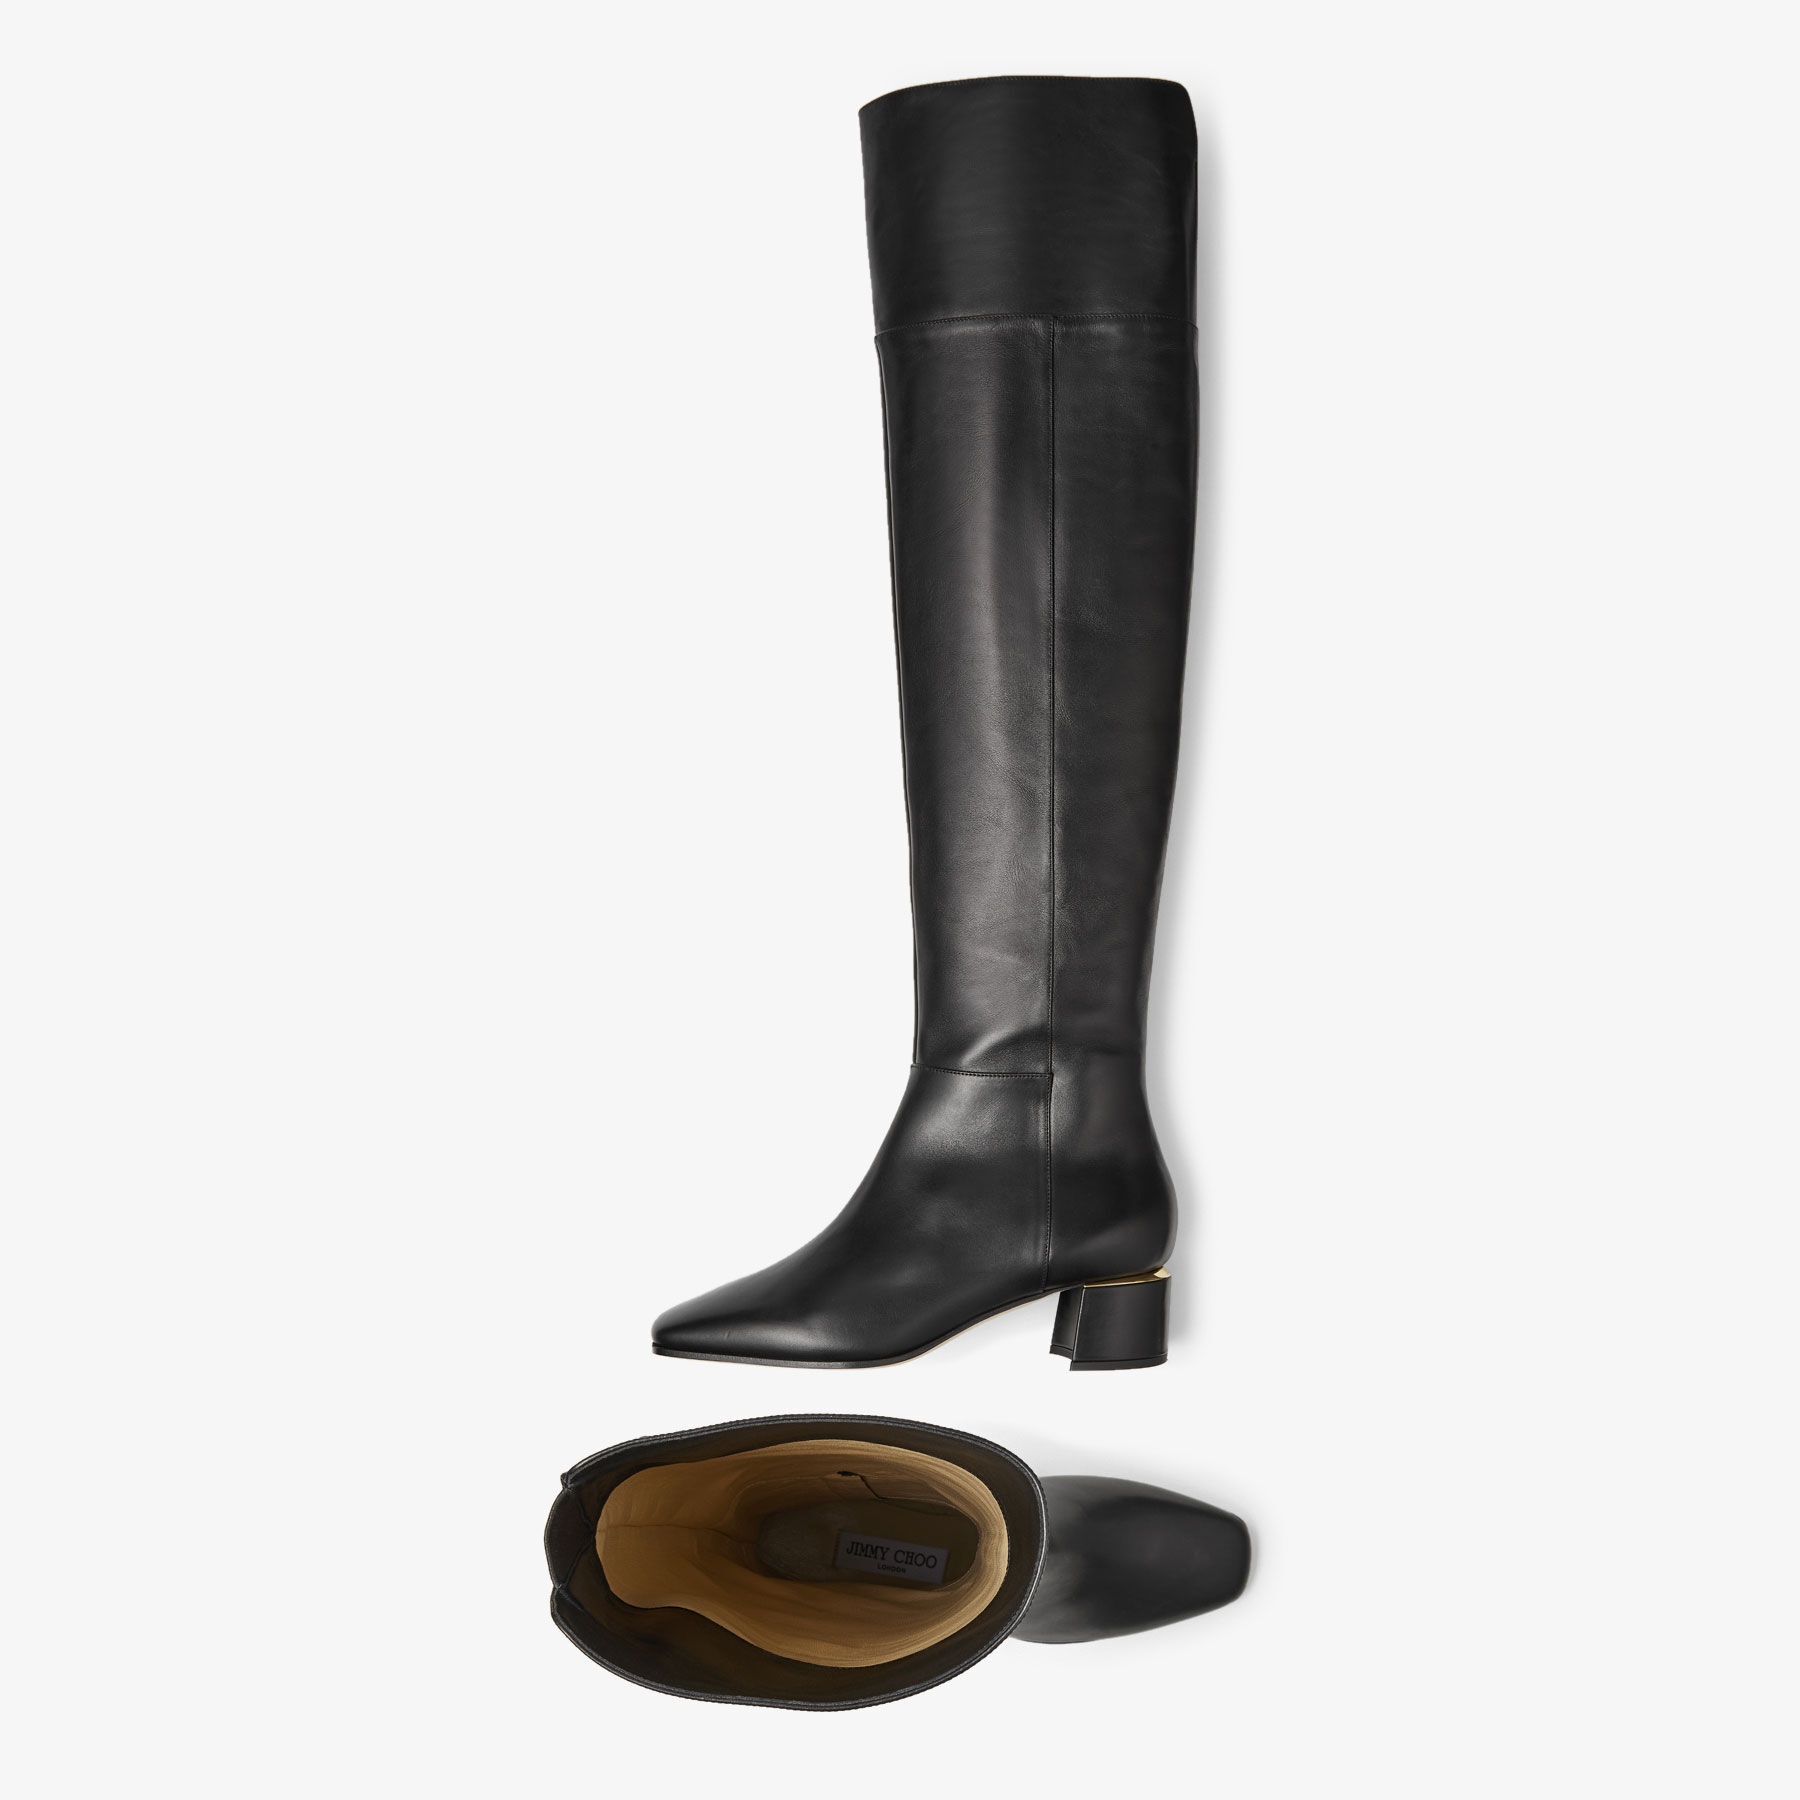 Loren Over The Knee 45
Black Calf Leather Over-The-Knee Boots - 4